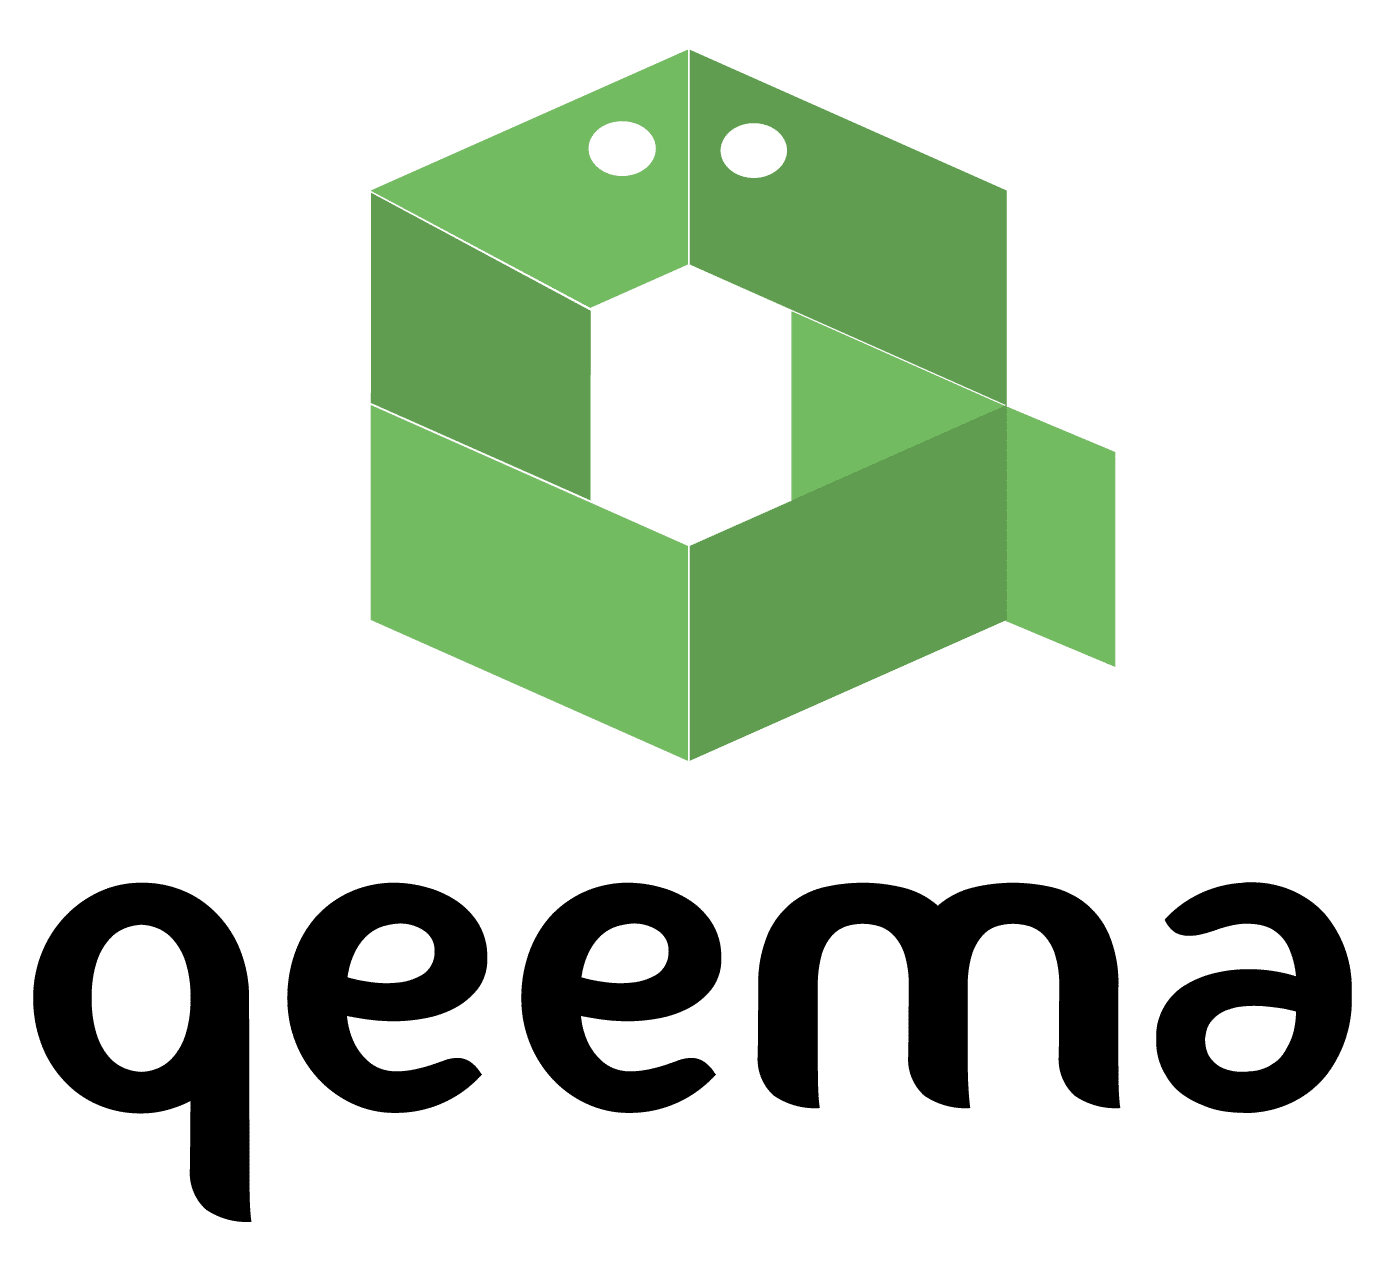 Qeema Consultancy and Technology Service